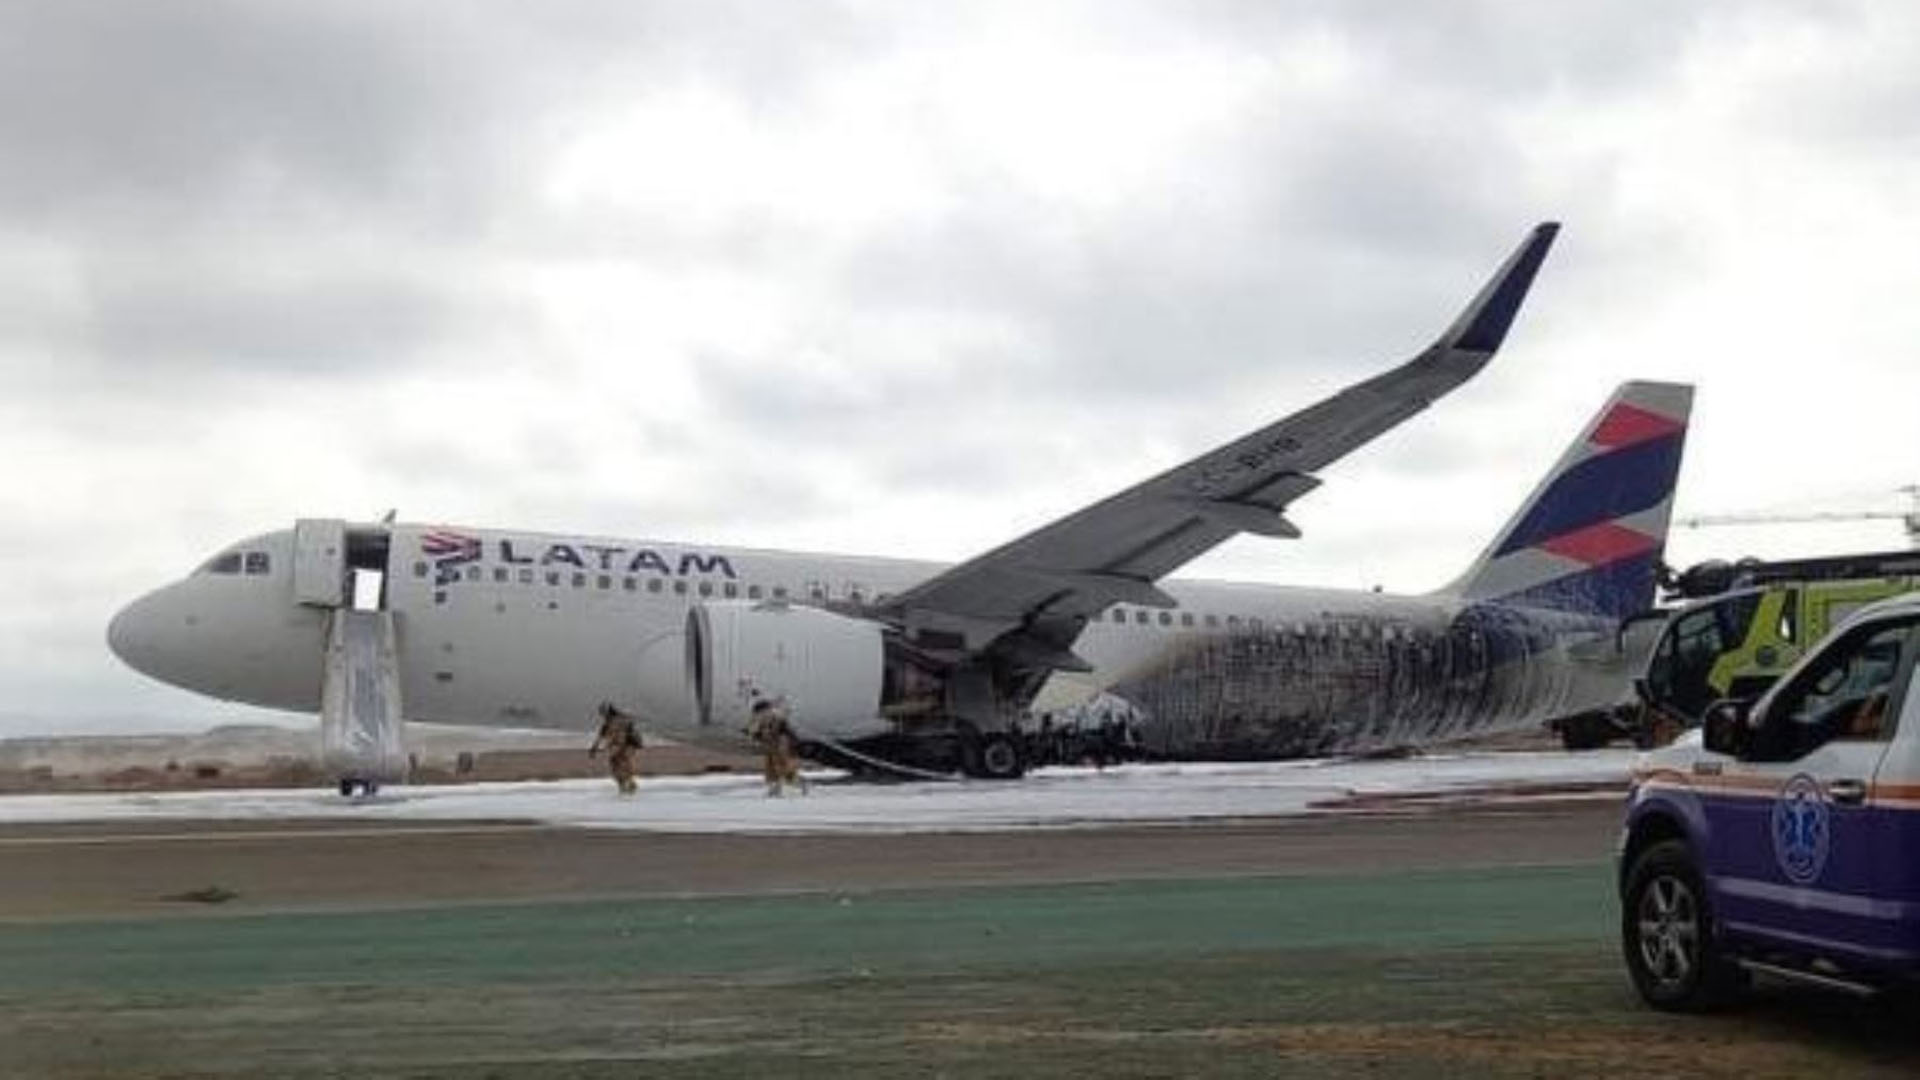 This is how the Latam plane was left after the accident.  (TV Peru)